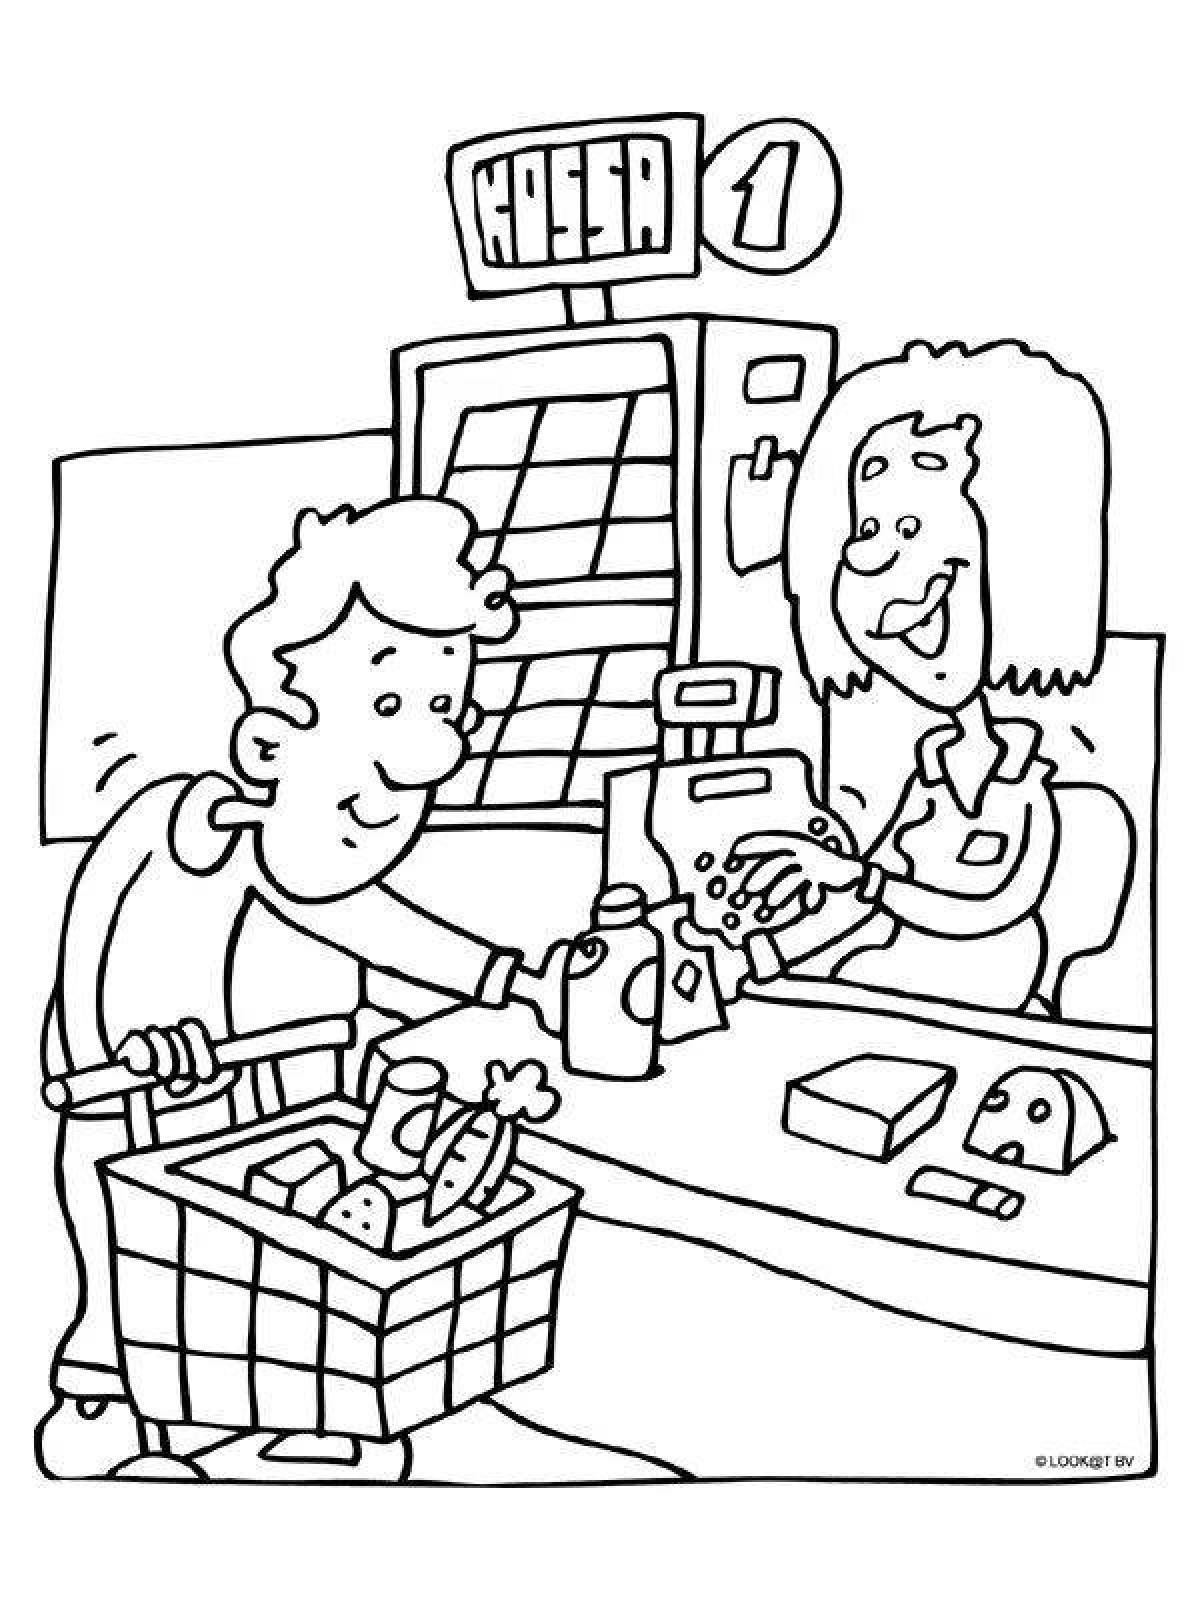 Charming salesman coloring page for kids